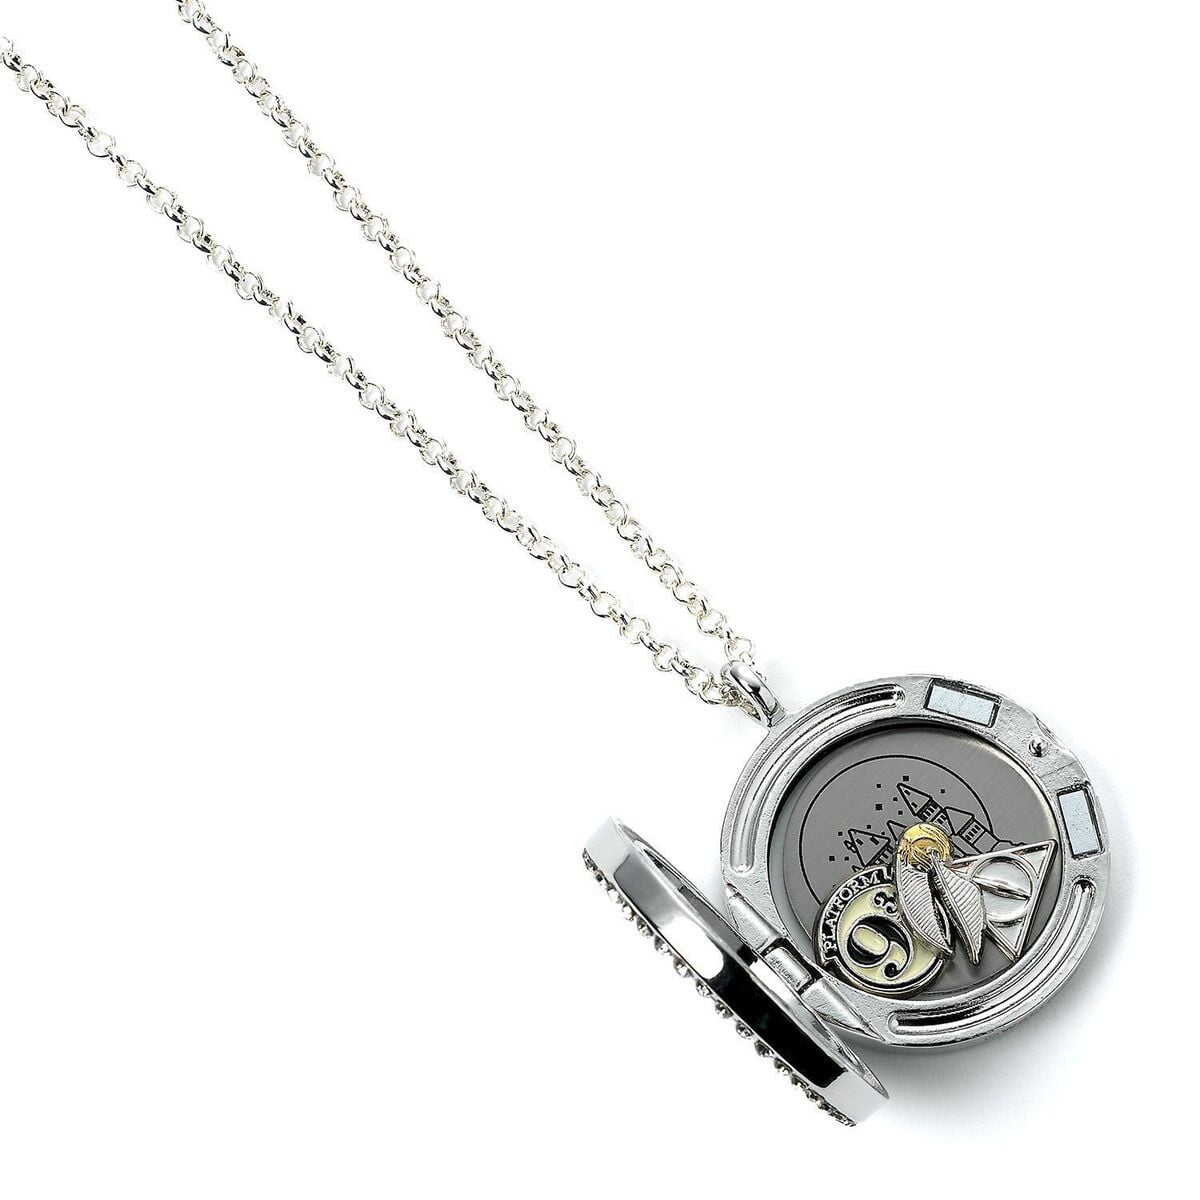 Harry Potter – Floating Charm Locket Necklace with 3 charms_2